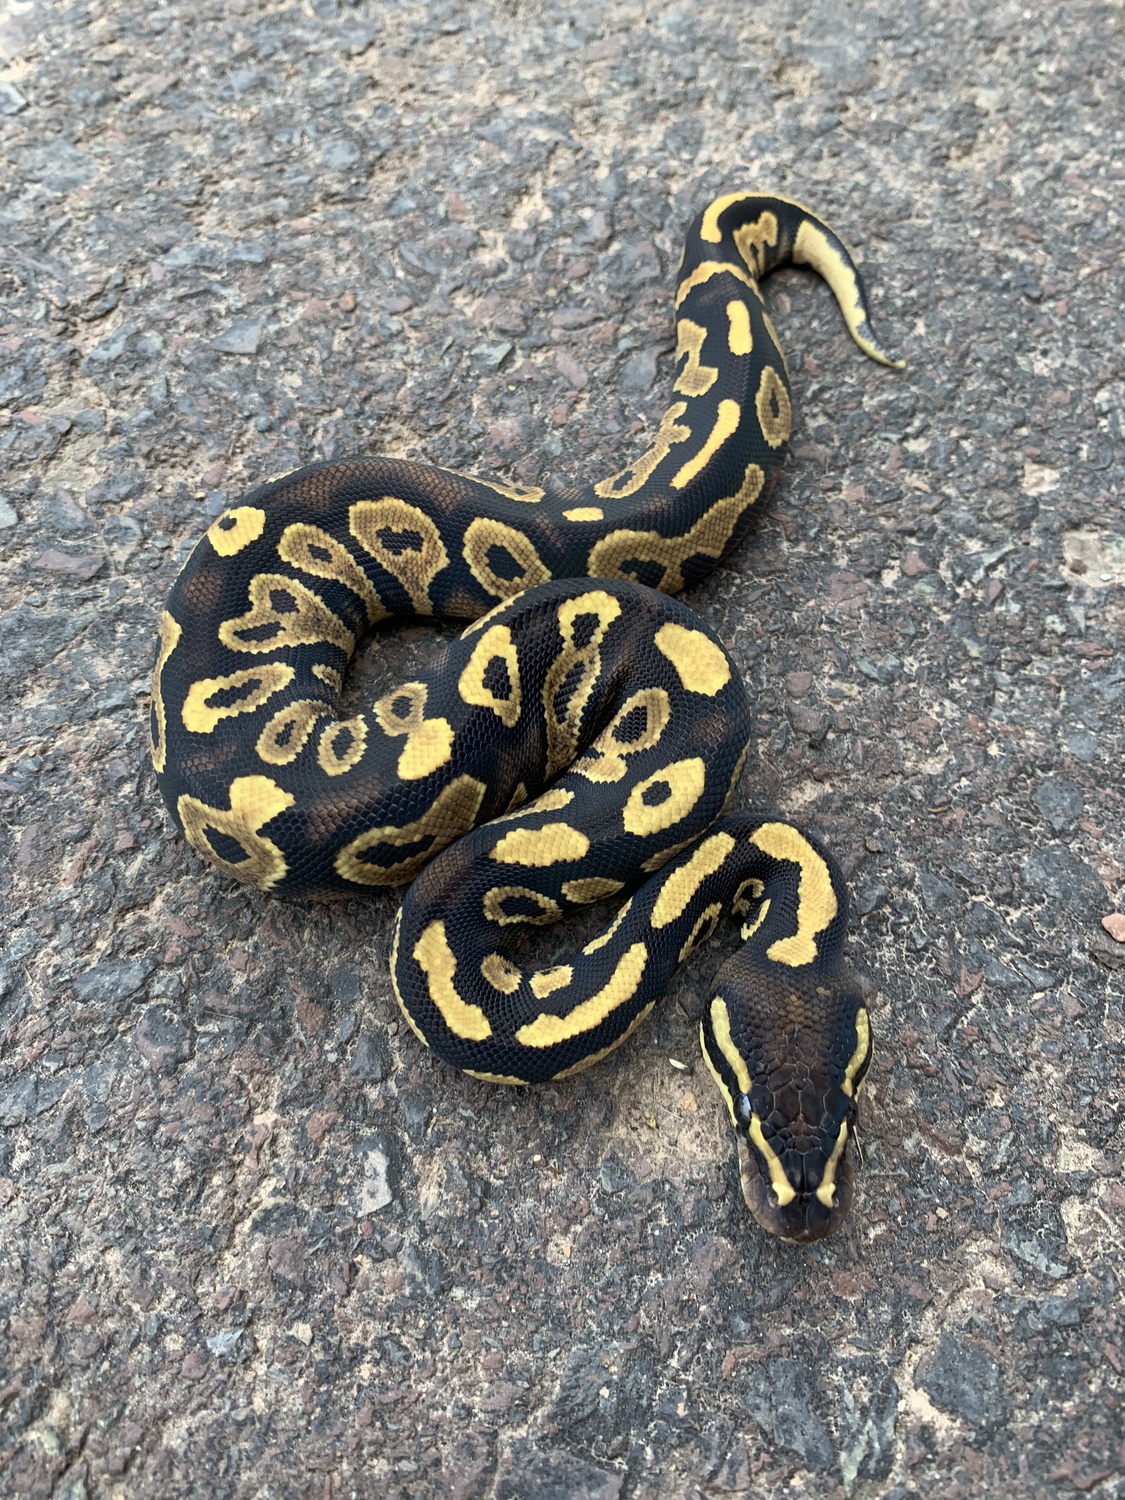 Astro Yellowbelly Ball Python by The Seventh Serpent